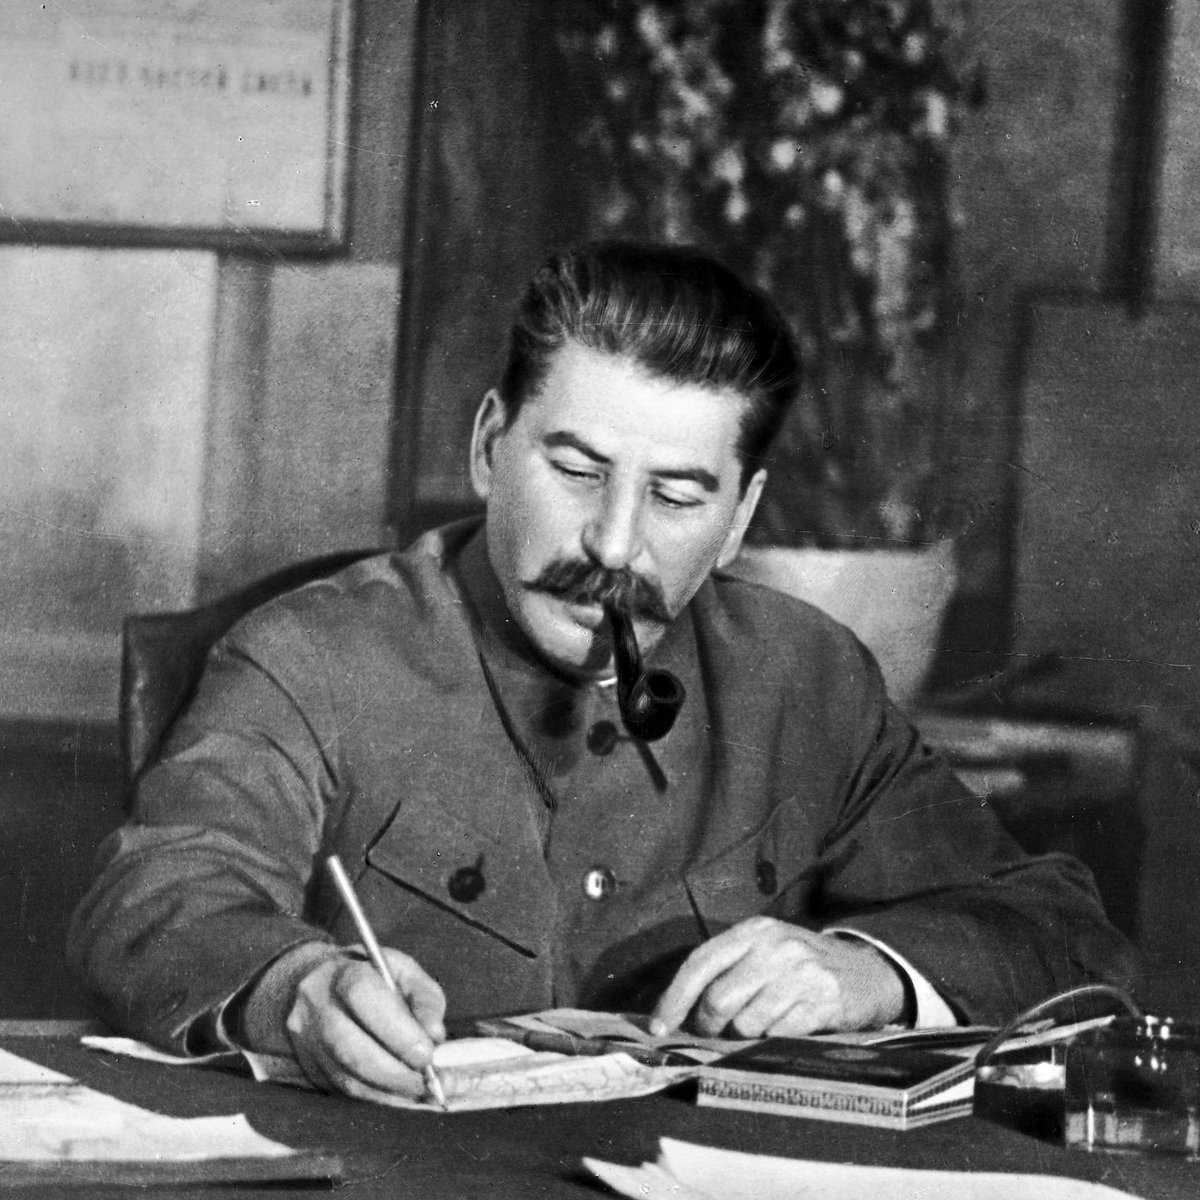 On the other side of Europe, Stalin's main goal was, in fact, to nudge Hitler into fighting another war with the British and French. He frequently spoke of a second "inter-capitalist war" which would exhaust the west, while the USSR watched. (10)